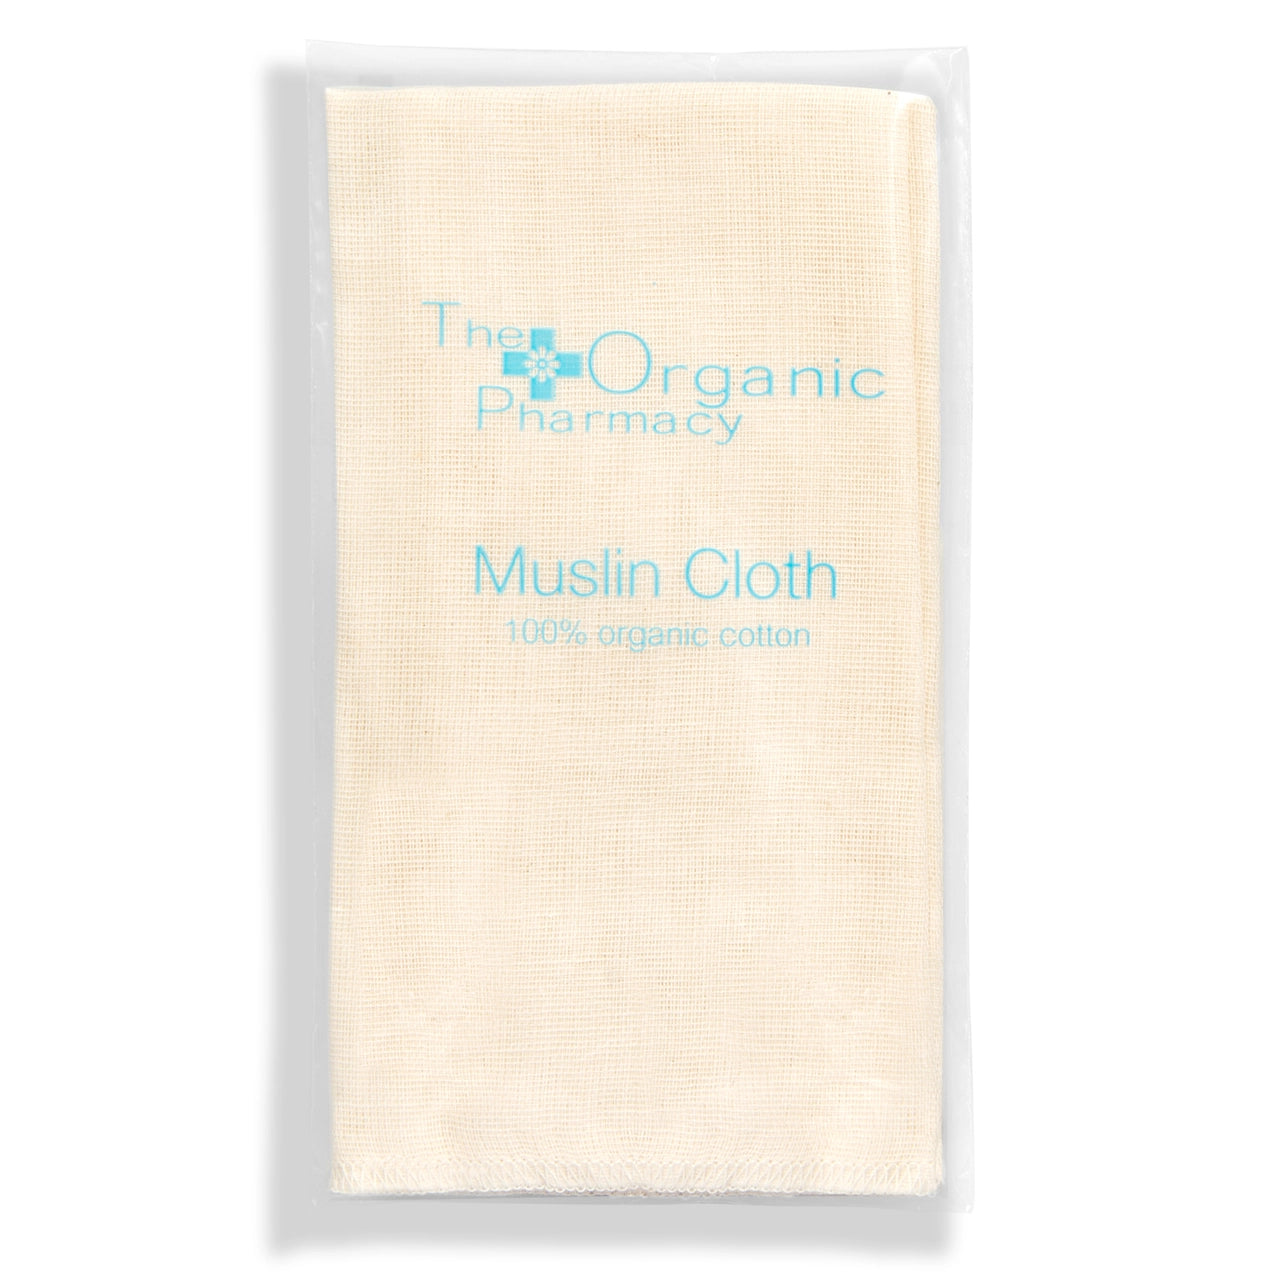 This 100% Organic cotton cloth is an essential element of any daily skincare routine